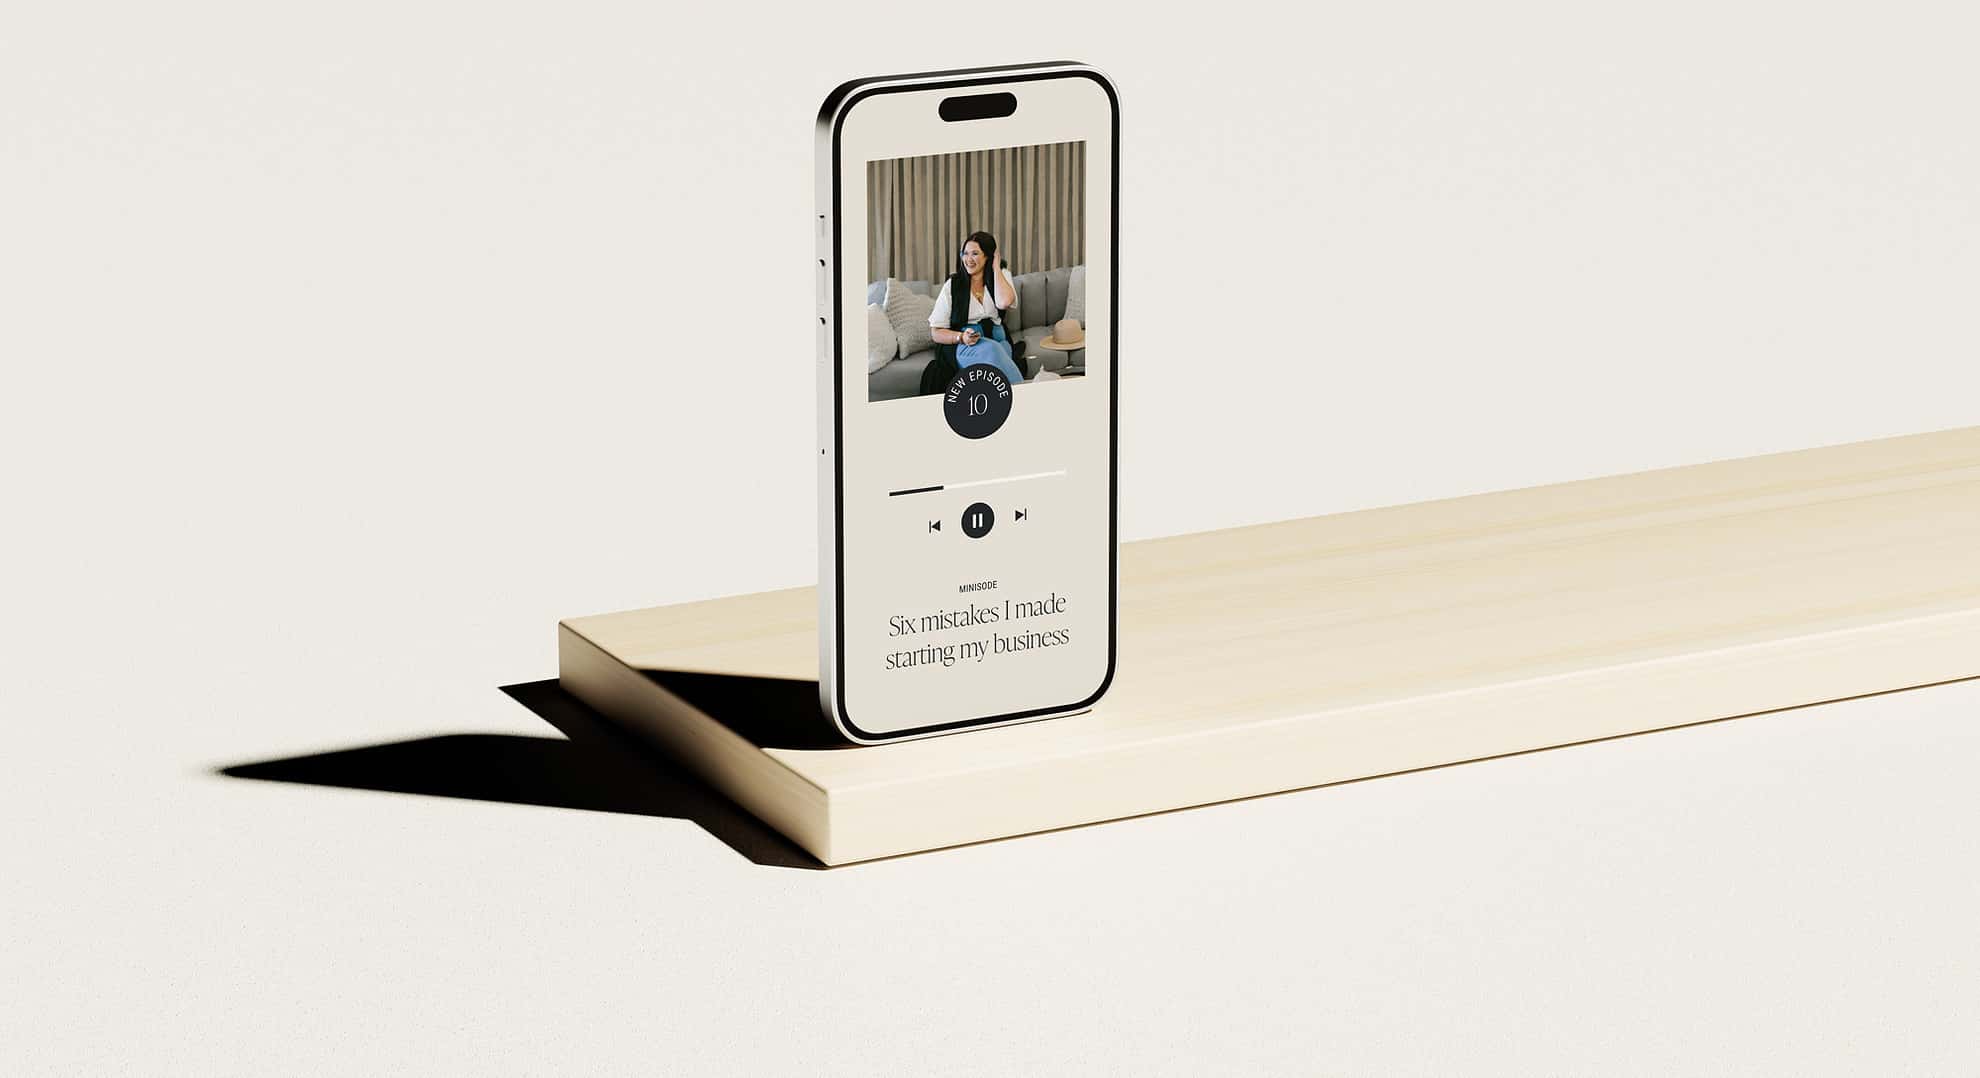 An iPhone is sitting on top of a wooden shelf.